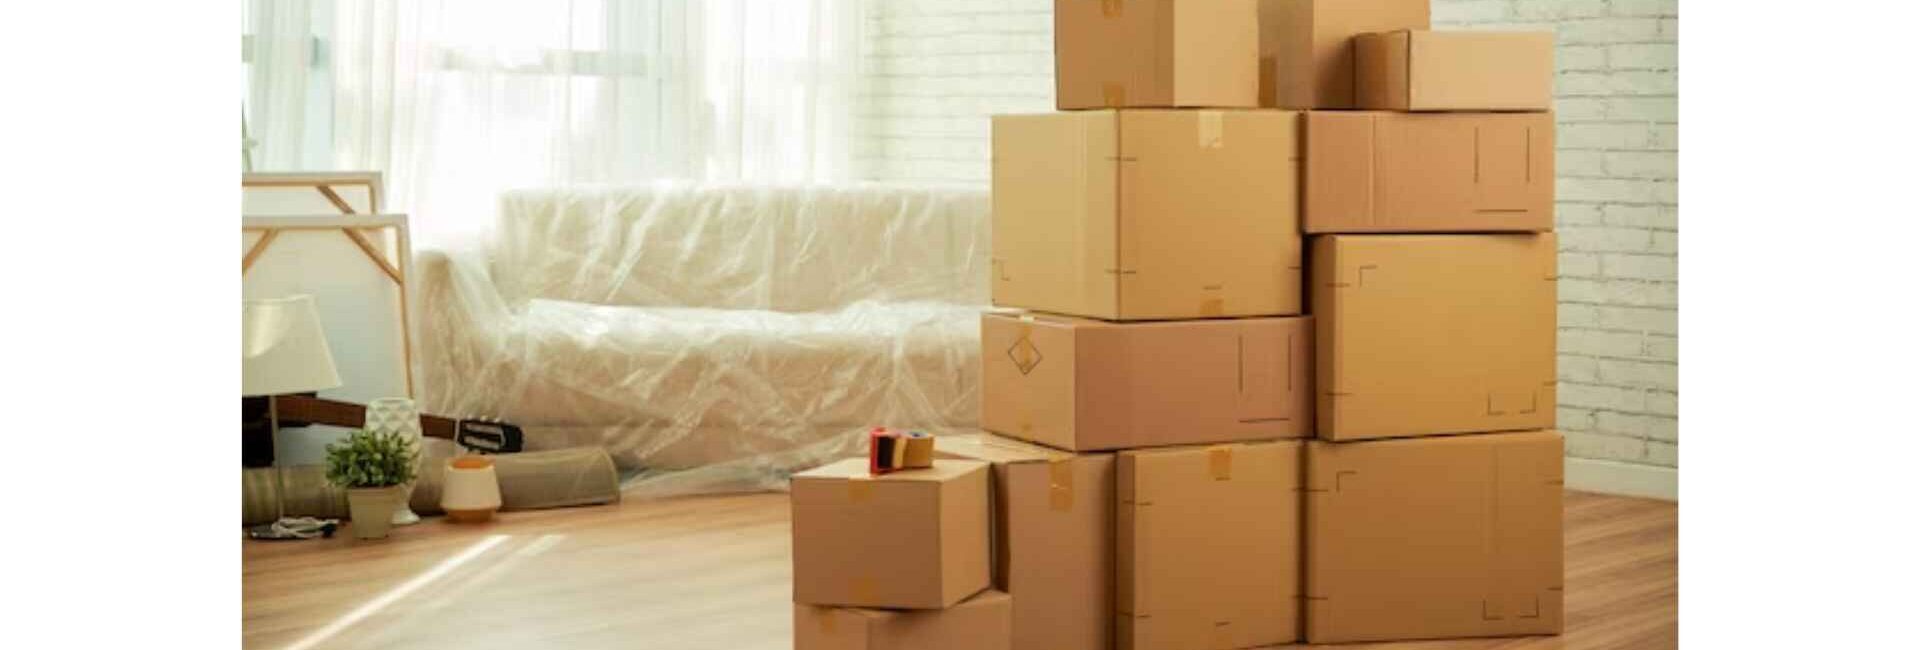 Unicon Packers and Movers Noida - Packers and Movers Service in Noida